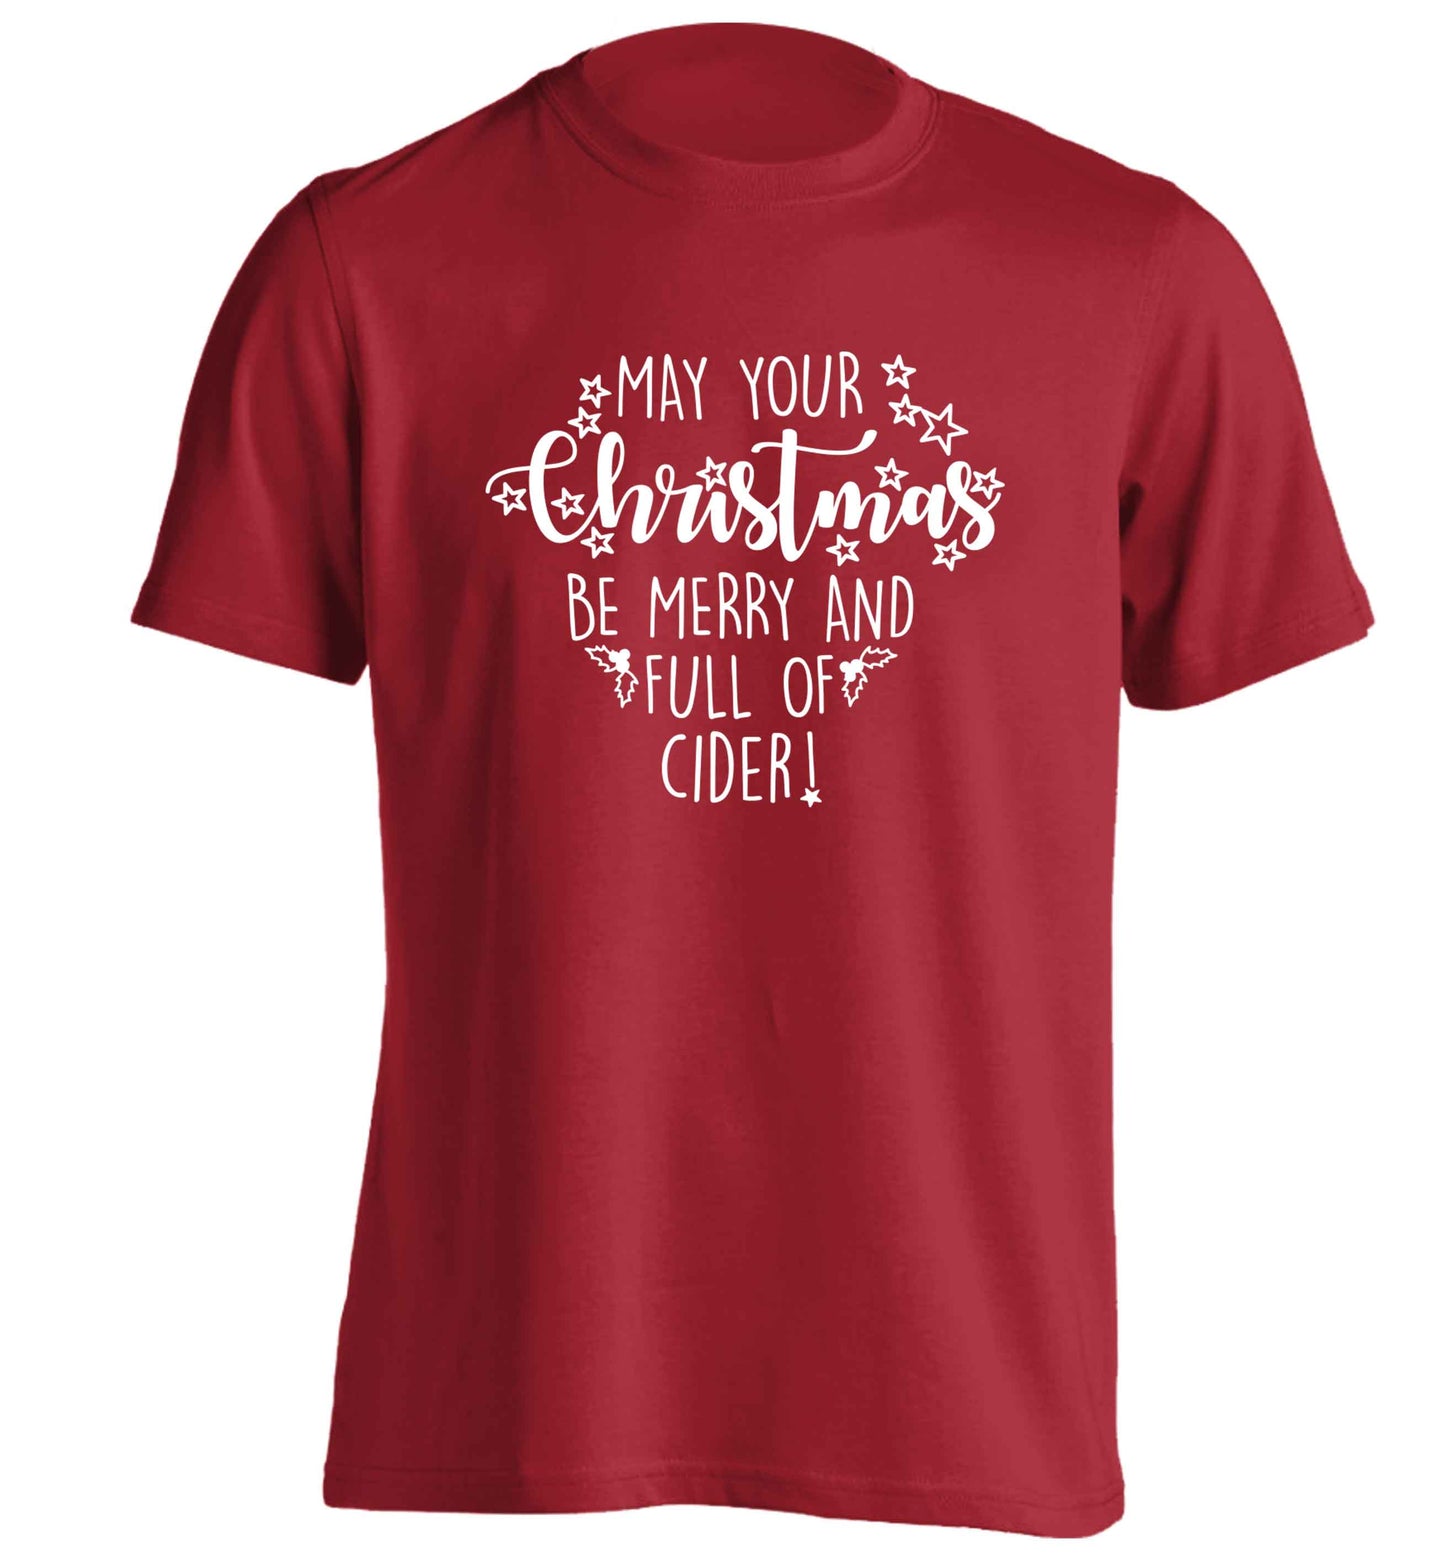 May your Christmas be merry and full of cider adults unisex red Tshirt 2XL